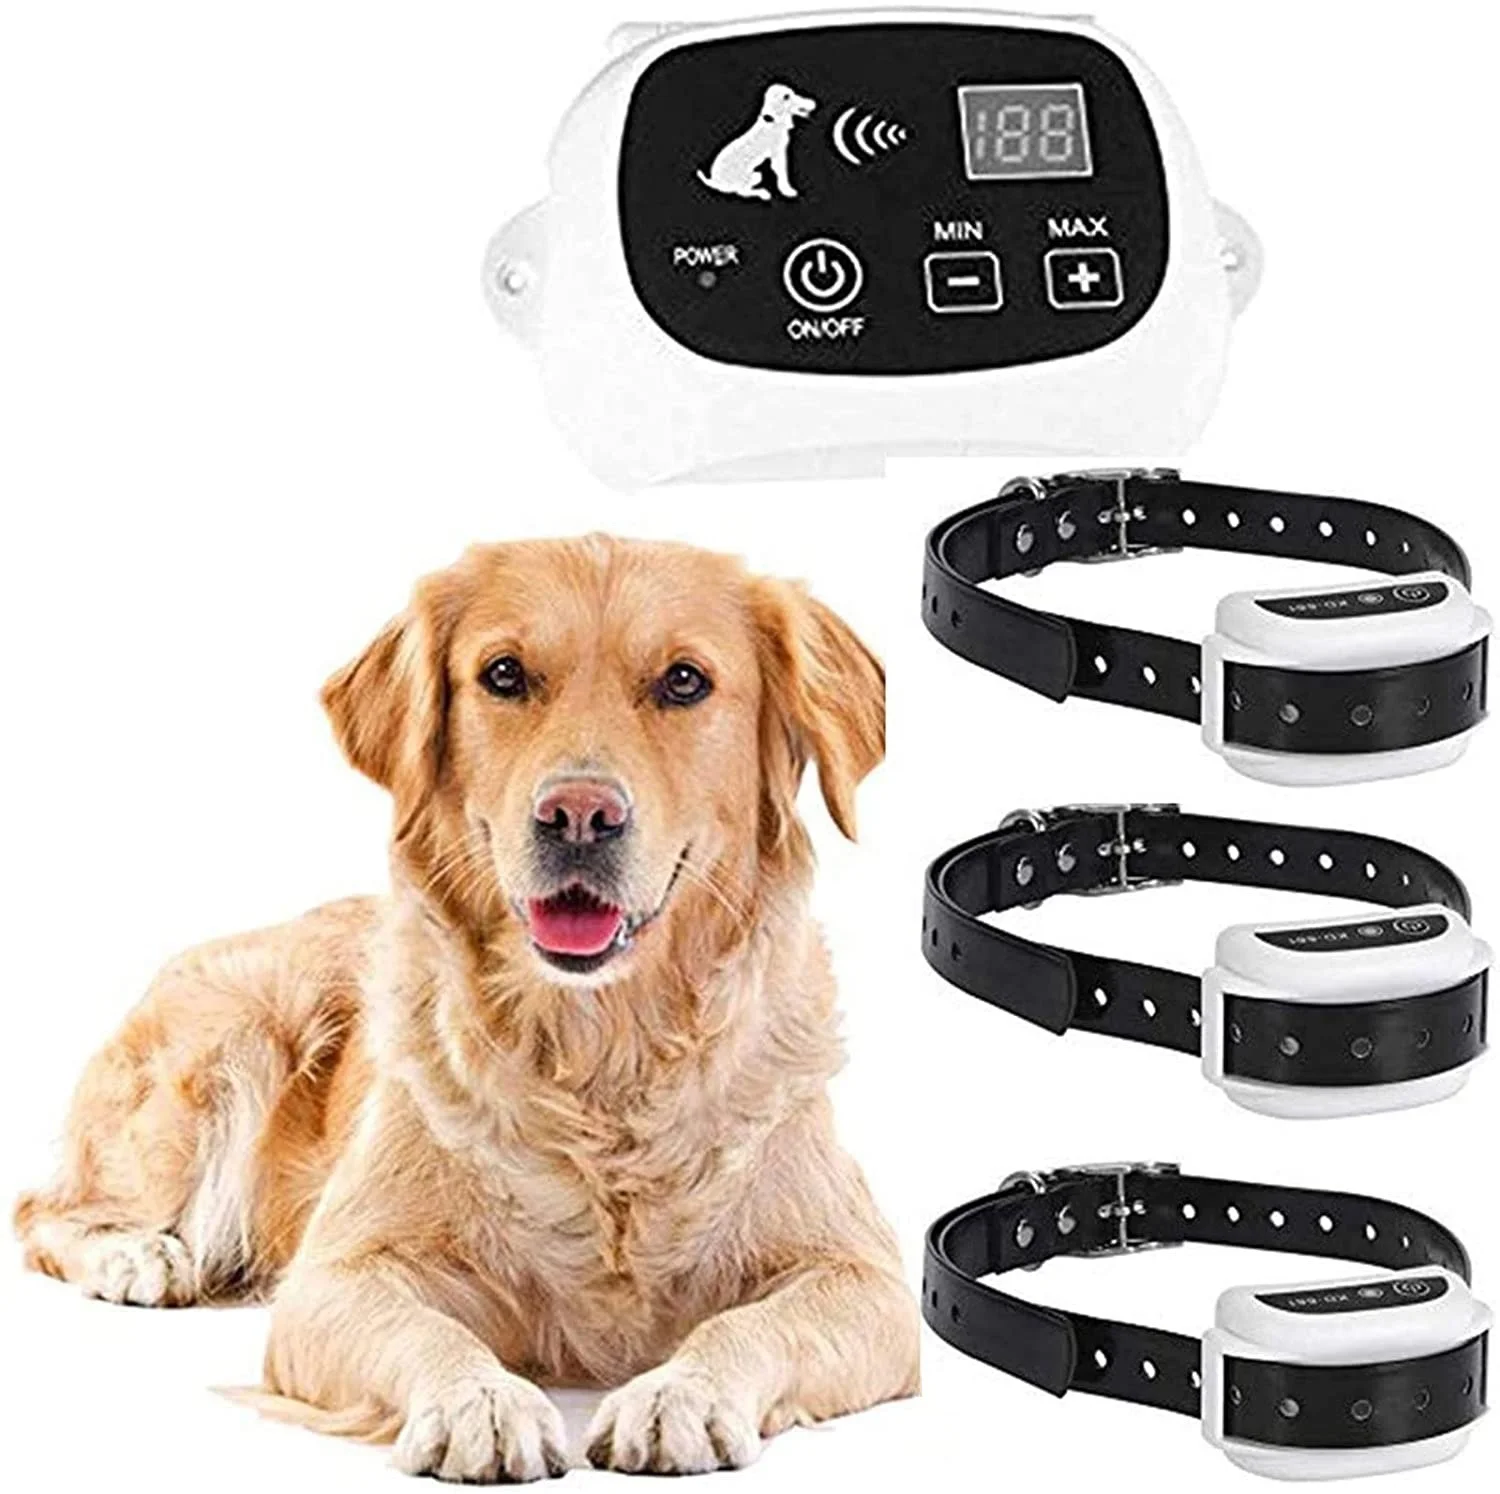 

Recinzione Training 2 In 1 Wireless Dog Safety Electronic System Adjustable Wireless Pet Fence With Waterproof Collar